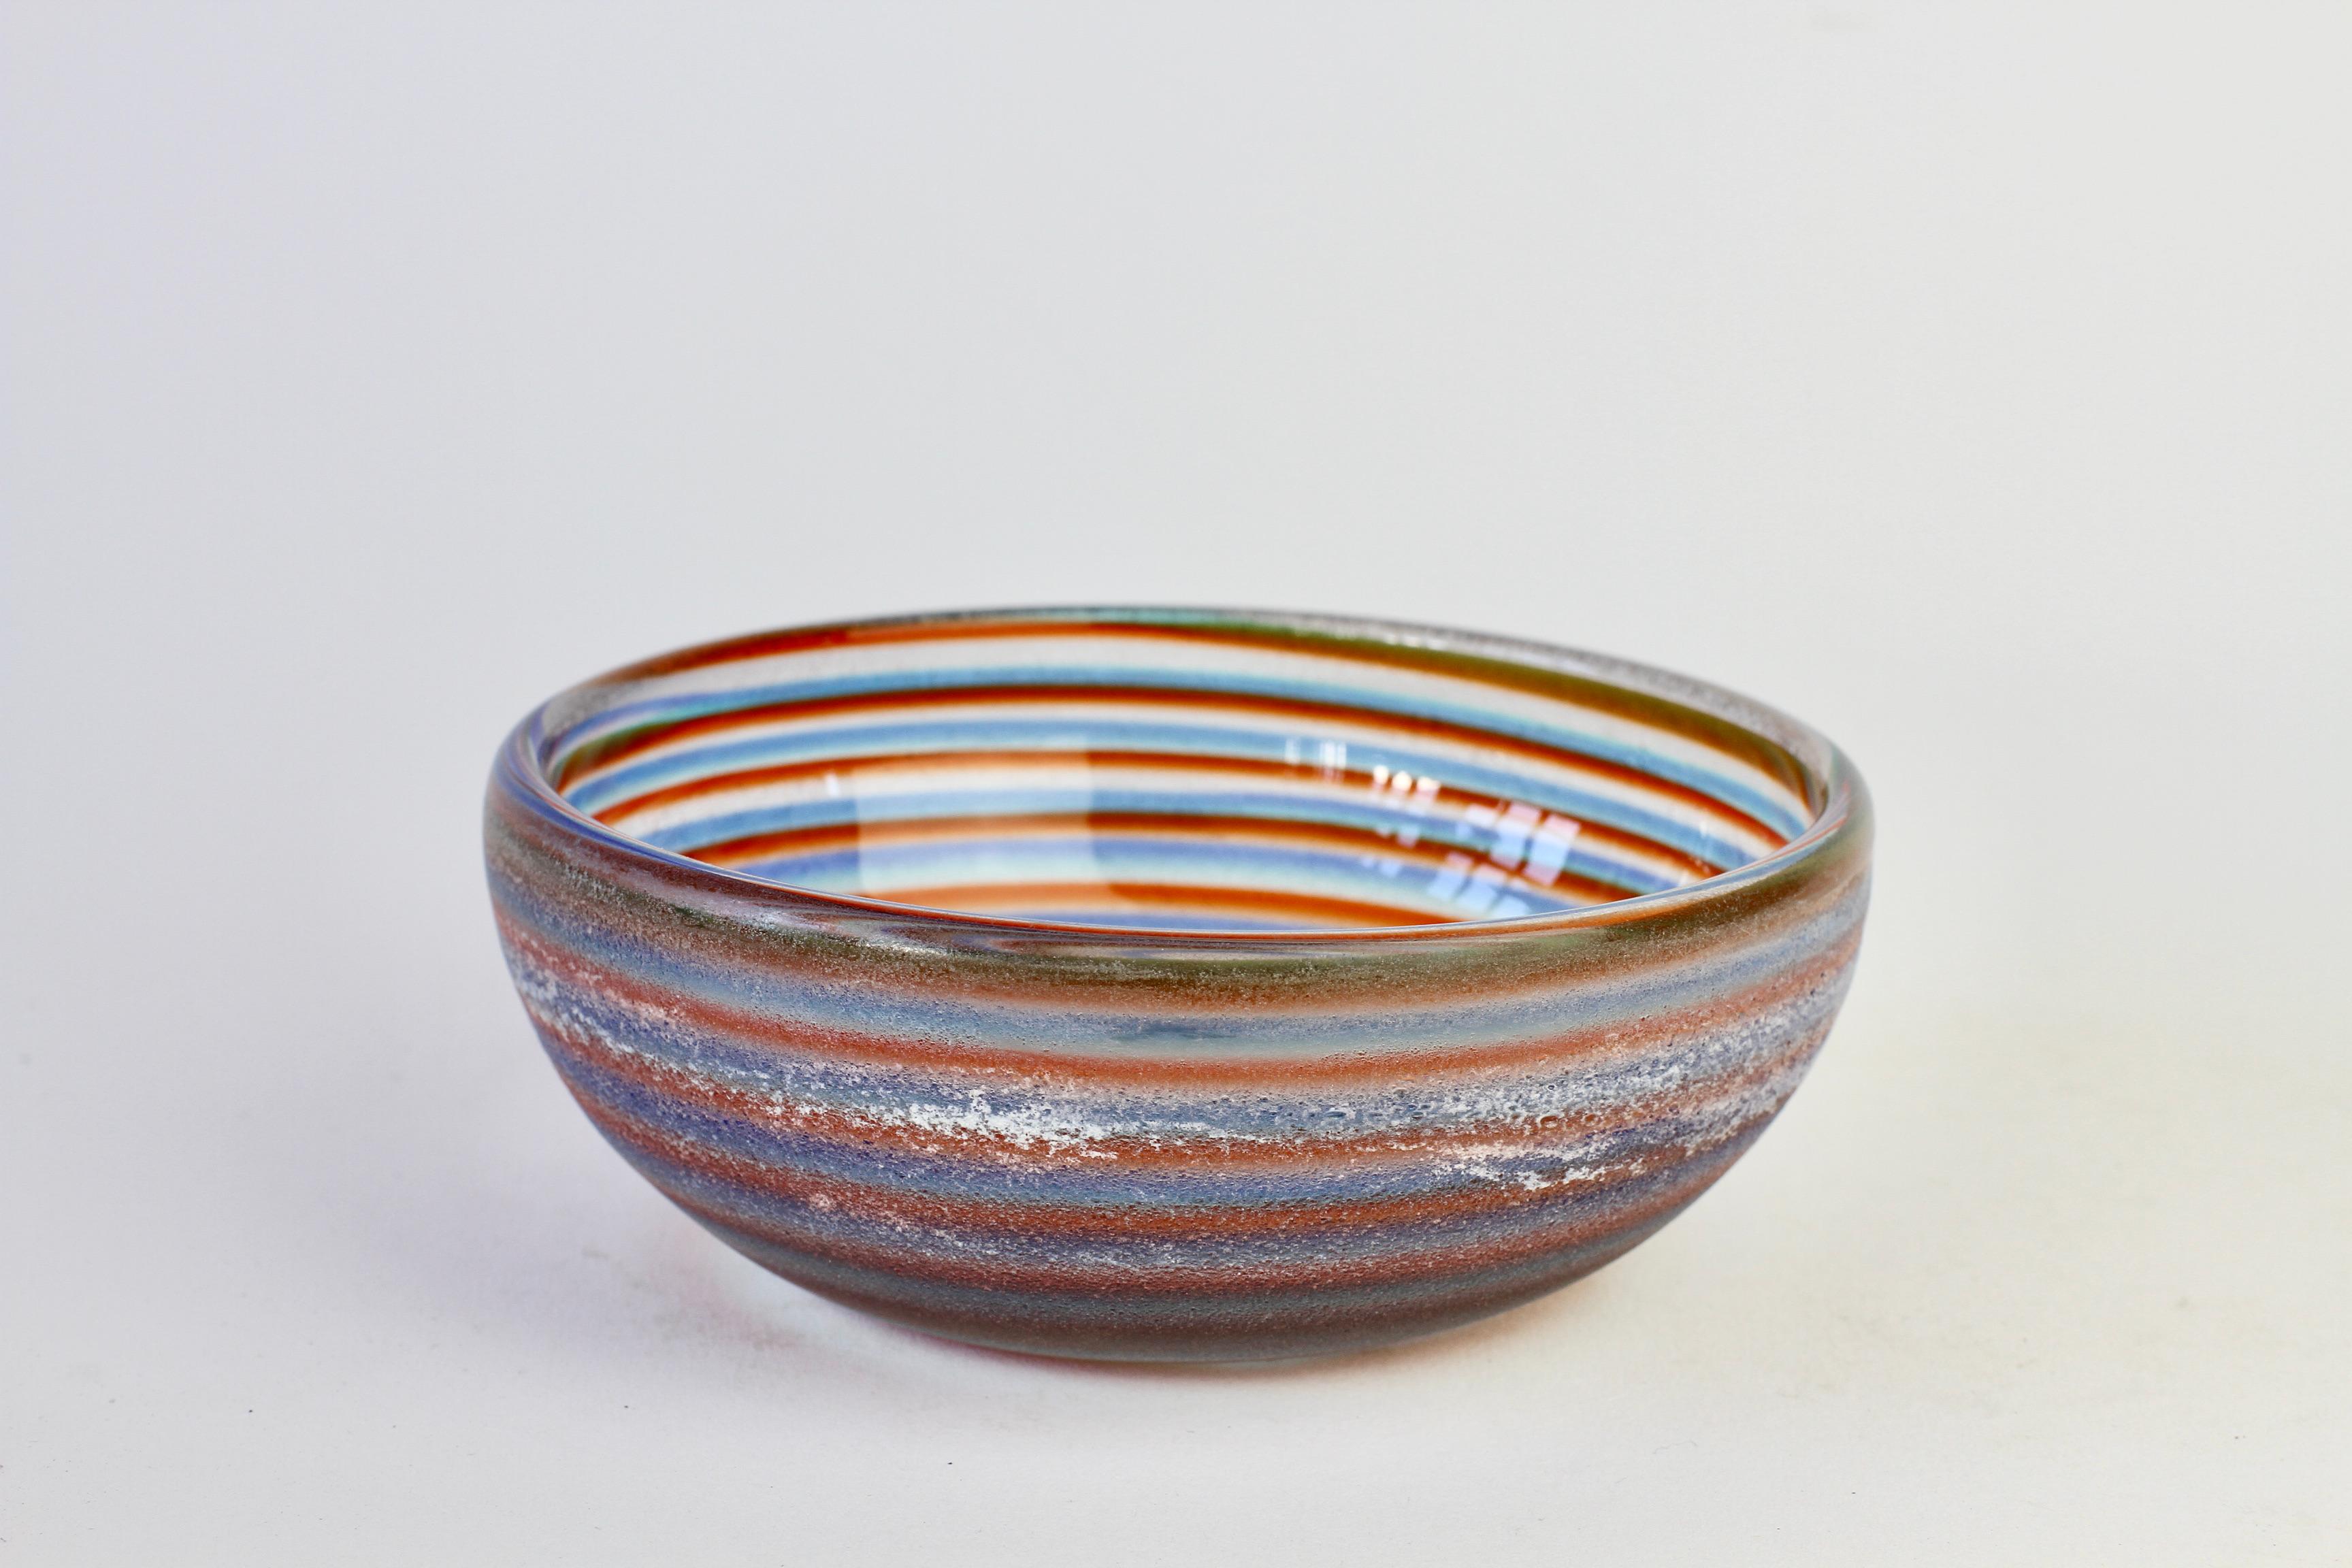 Italian Cenedese Vintage Mid-Century 'Corroso' Murano Glass Bowl with Colorful Spiral